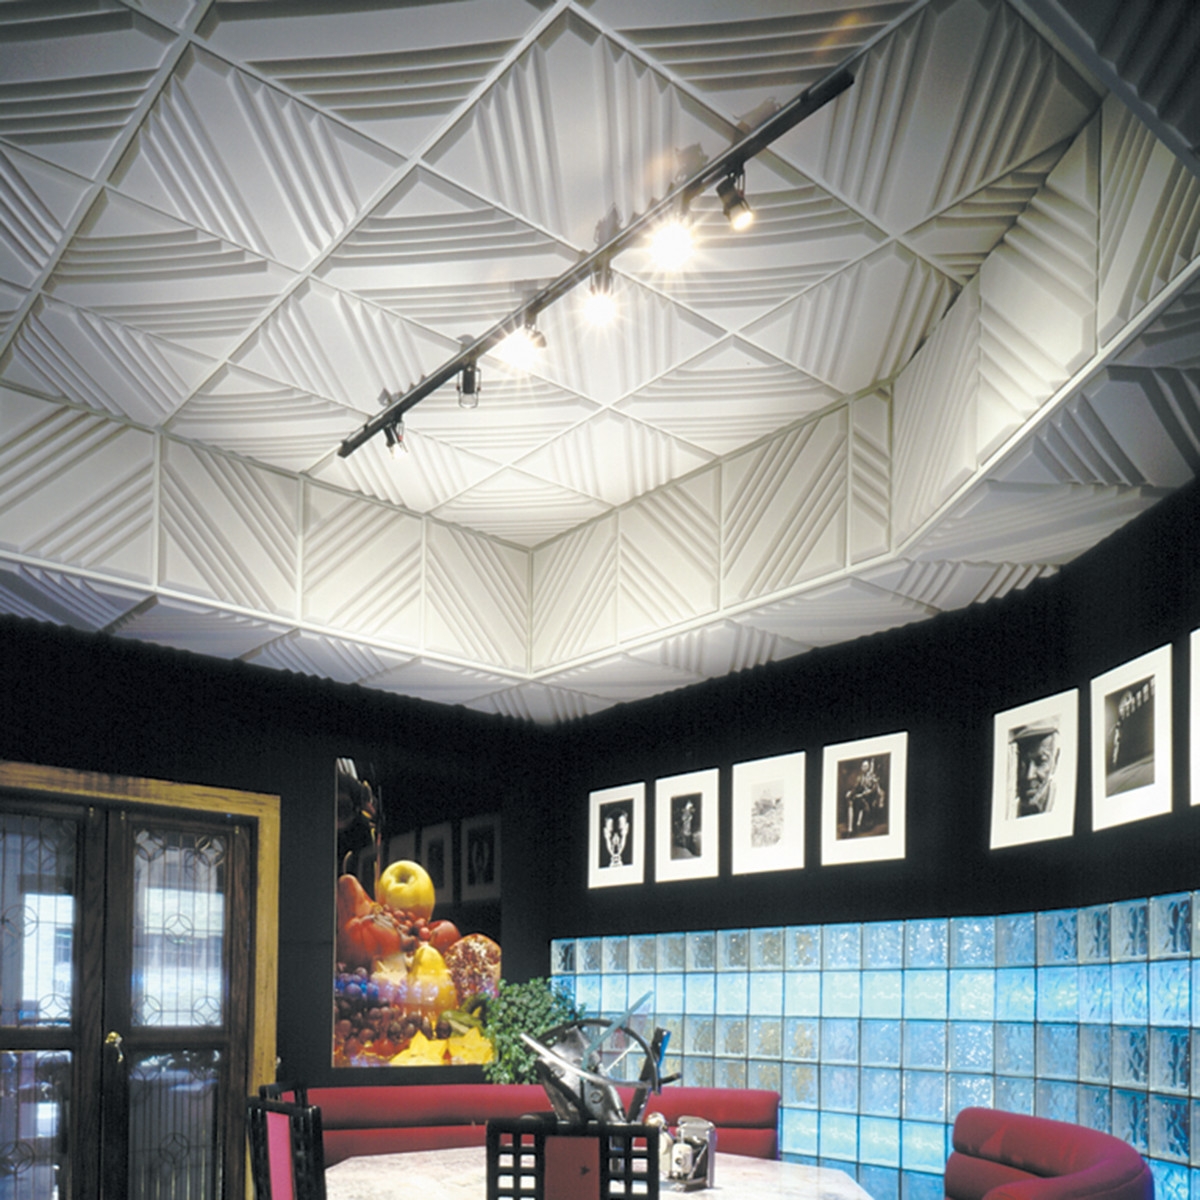 Permalink to Acoustic Tiles For Ceiling